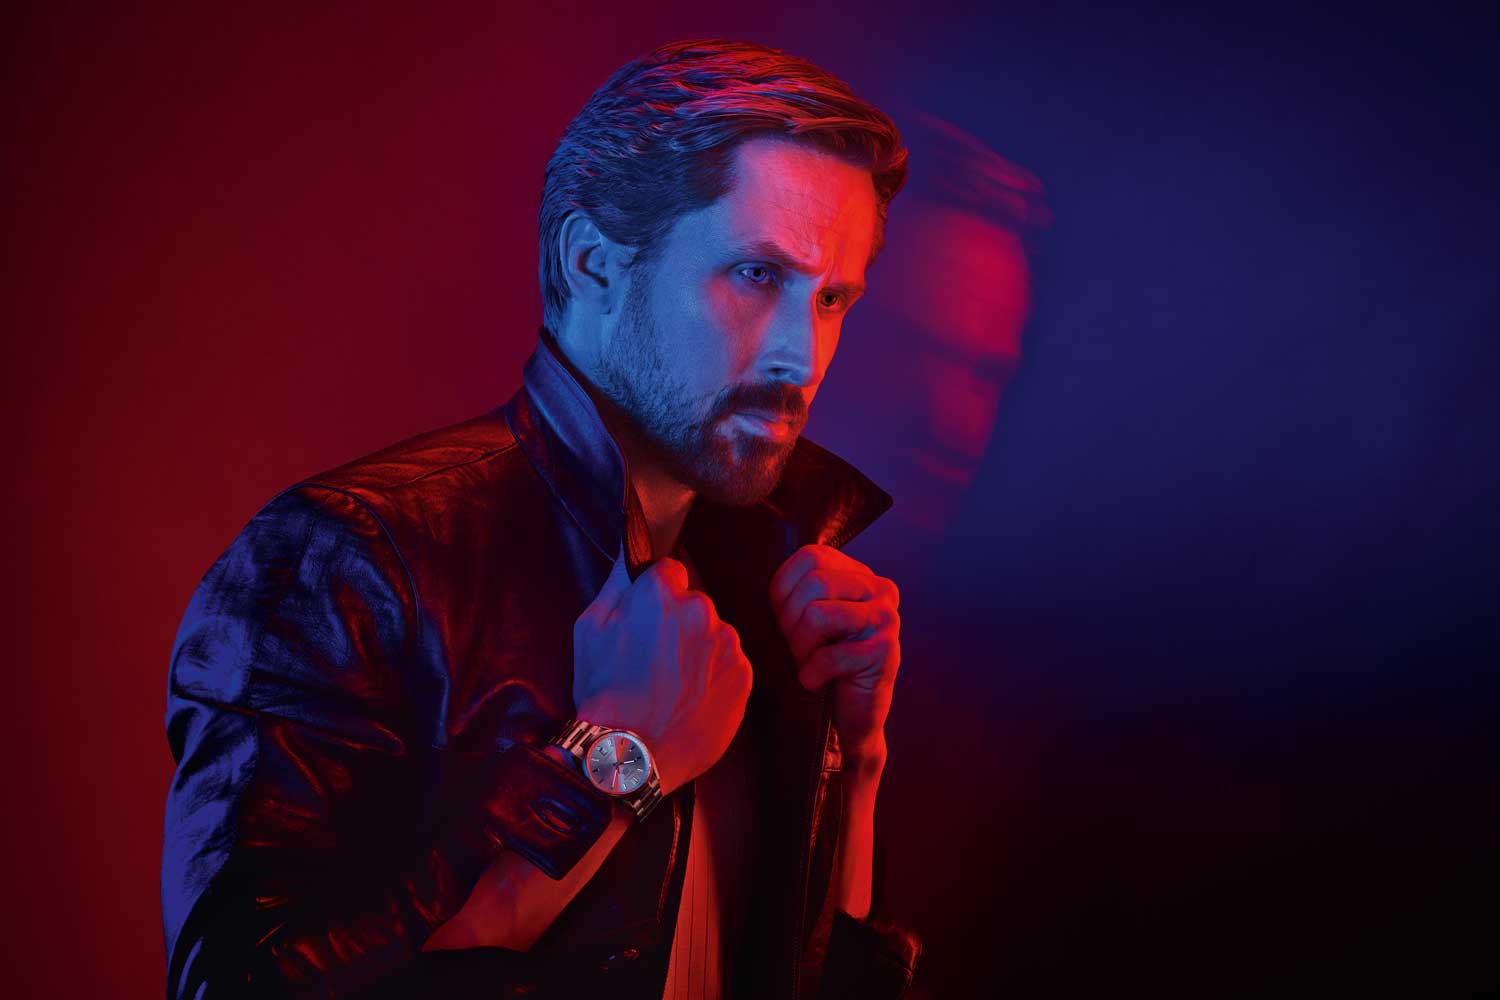 This is the first time that Ryan Gosling has taken up a brand ambassadorship